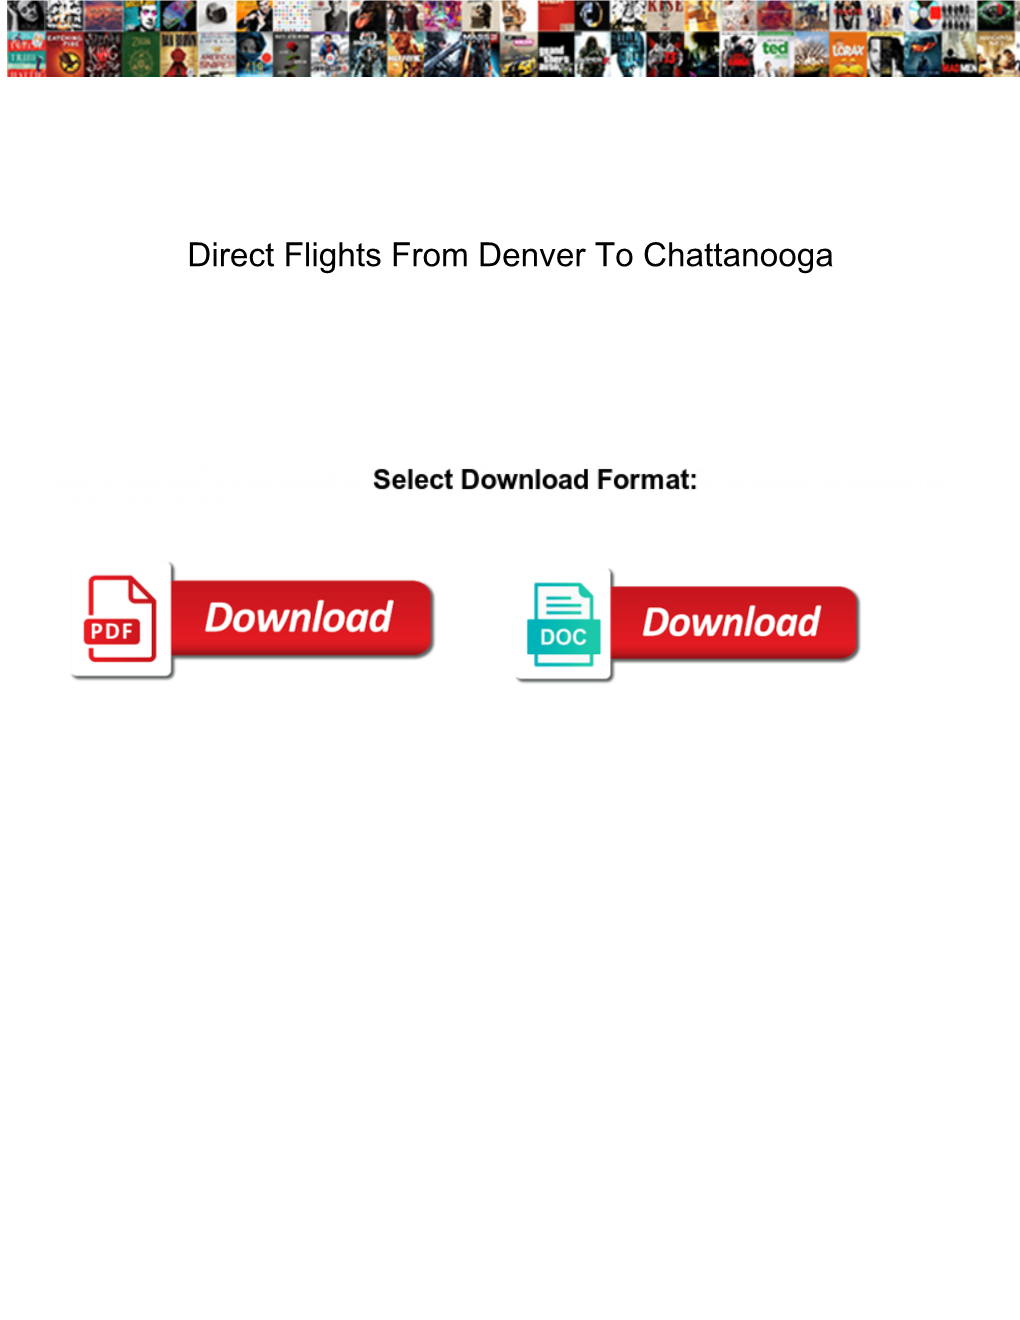 Direct Flights from Denver to Chattanooga